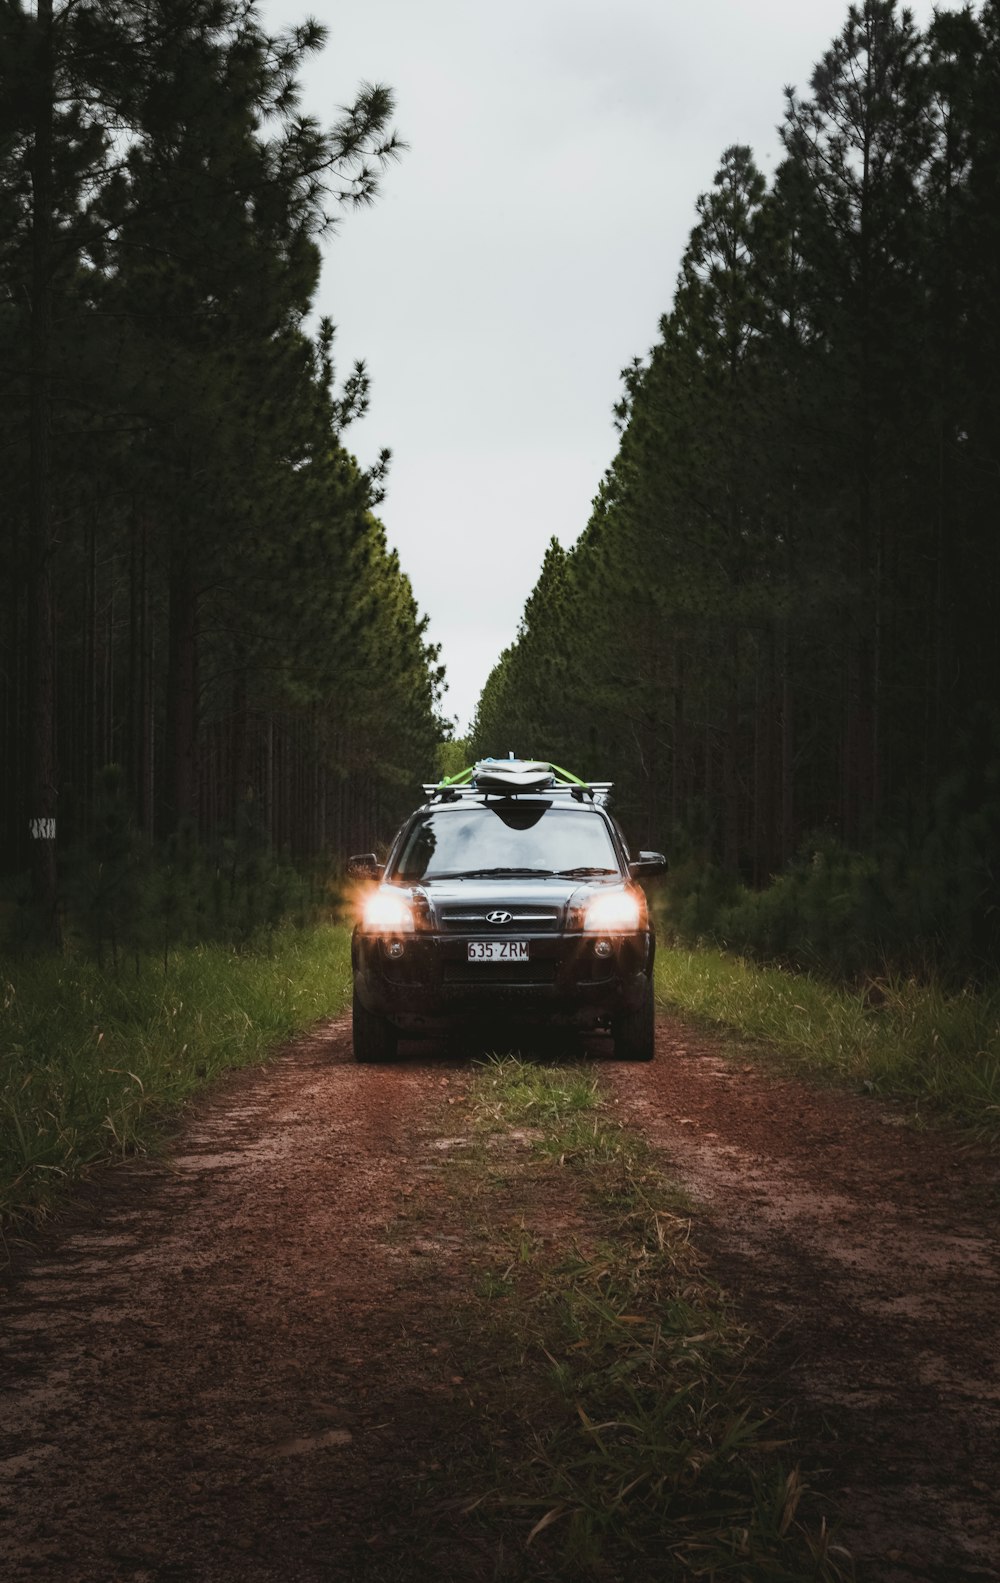 black car on dirt road in between green trees during daytime